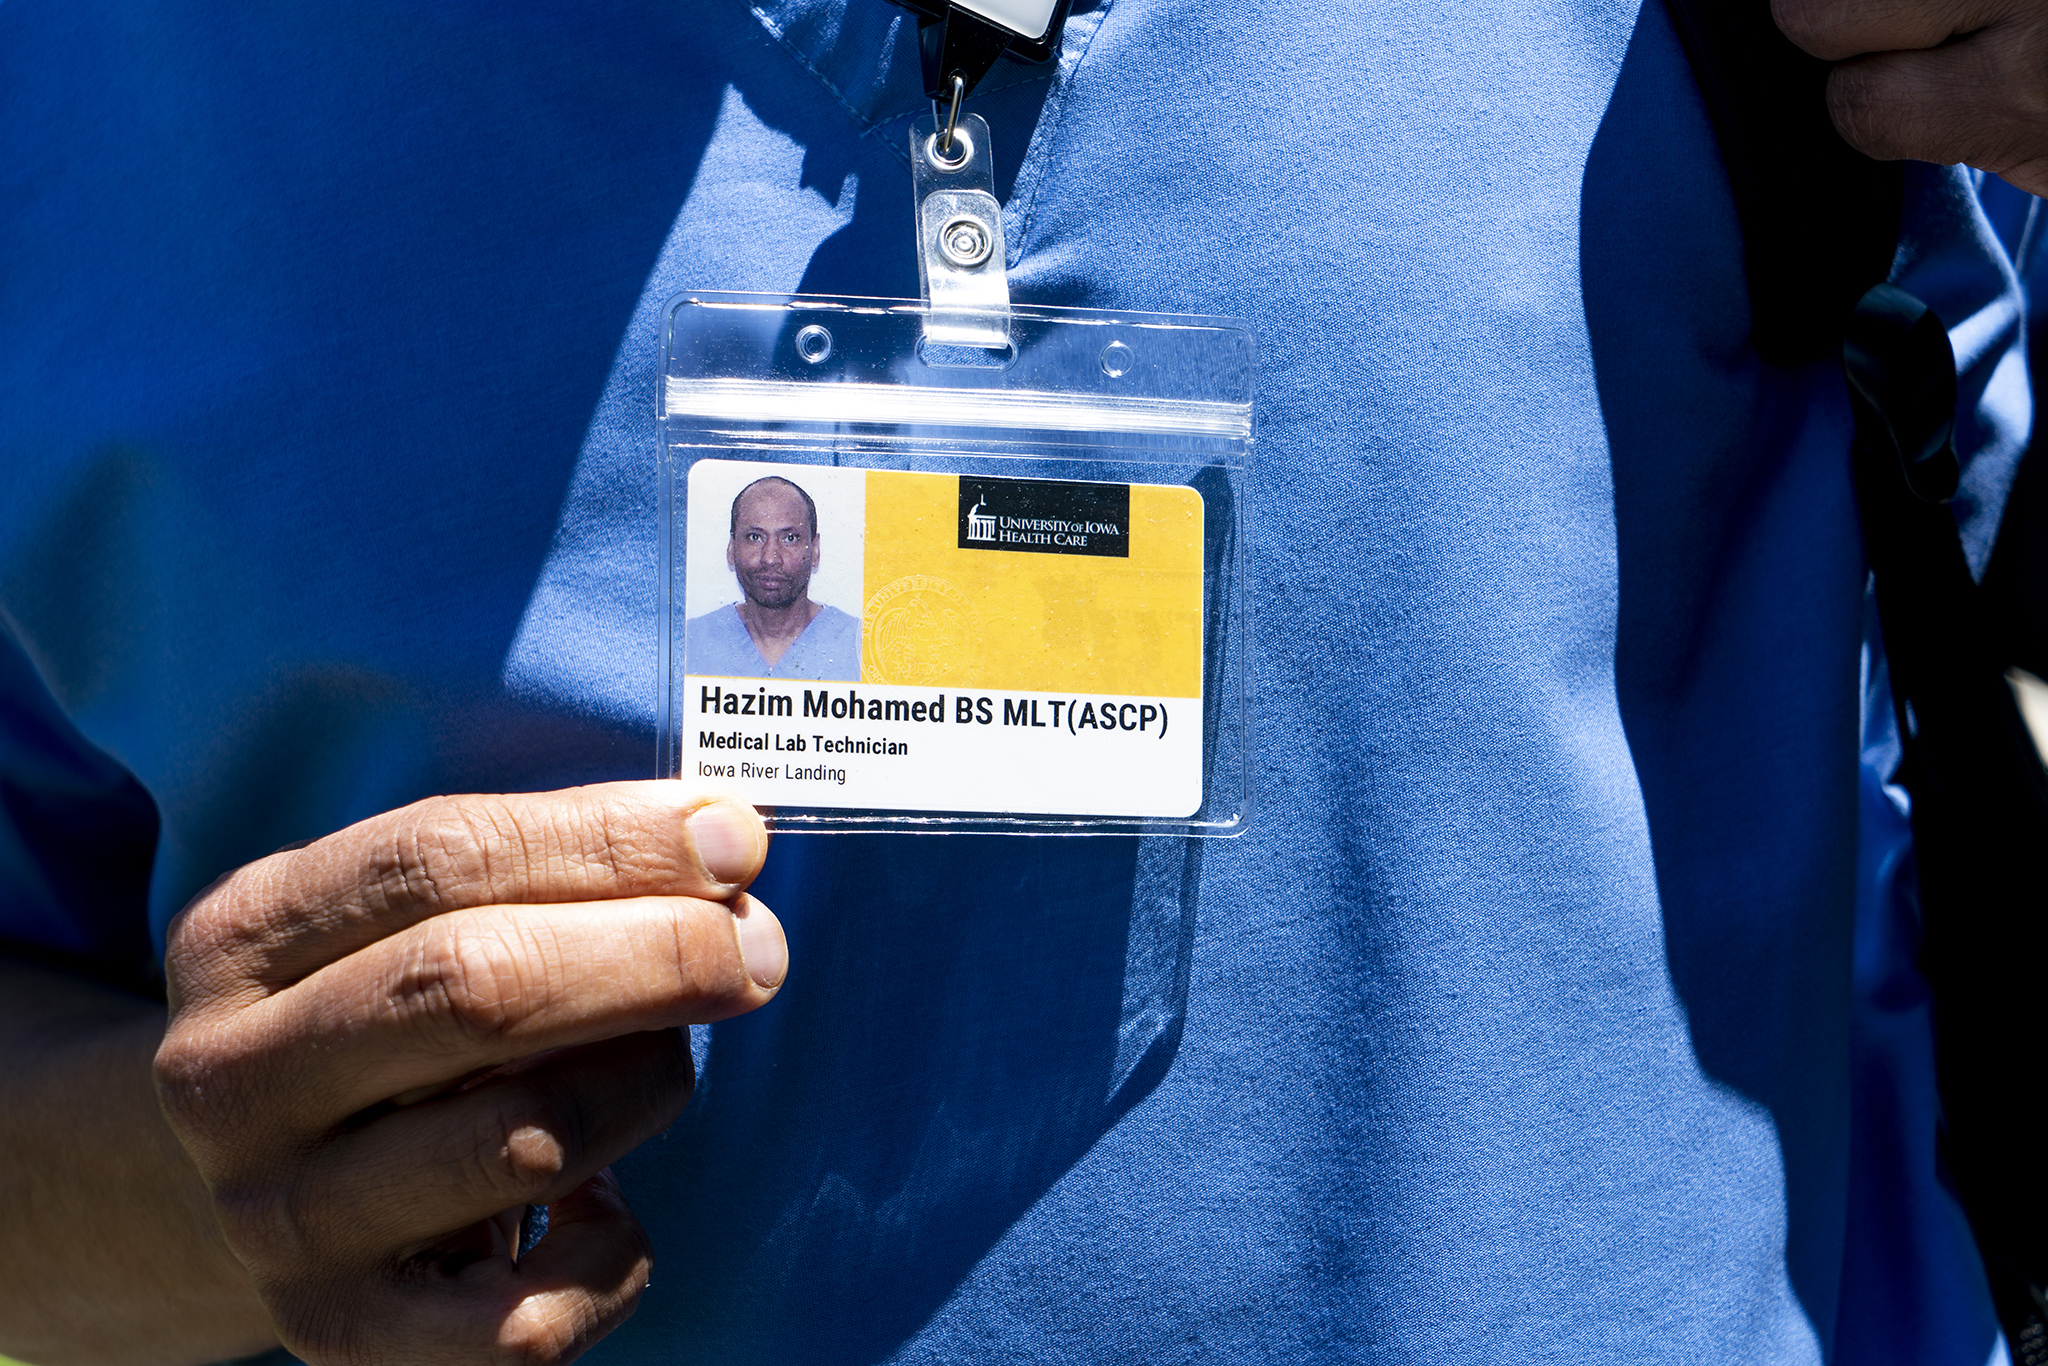 Mohamed holds his University of Iowa Hospitals and Clinics badge in front of his blue scrubs.